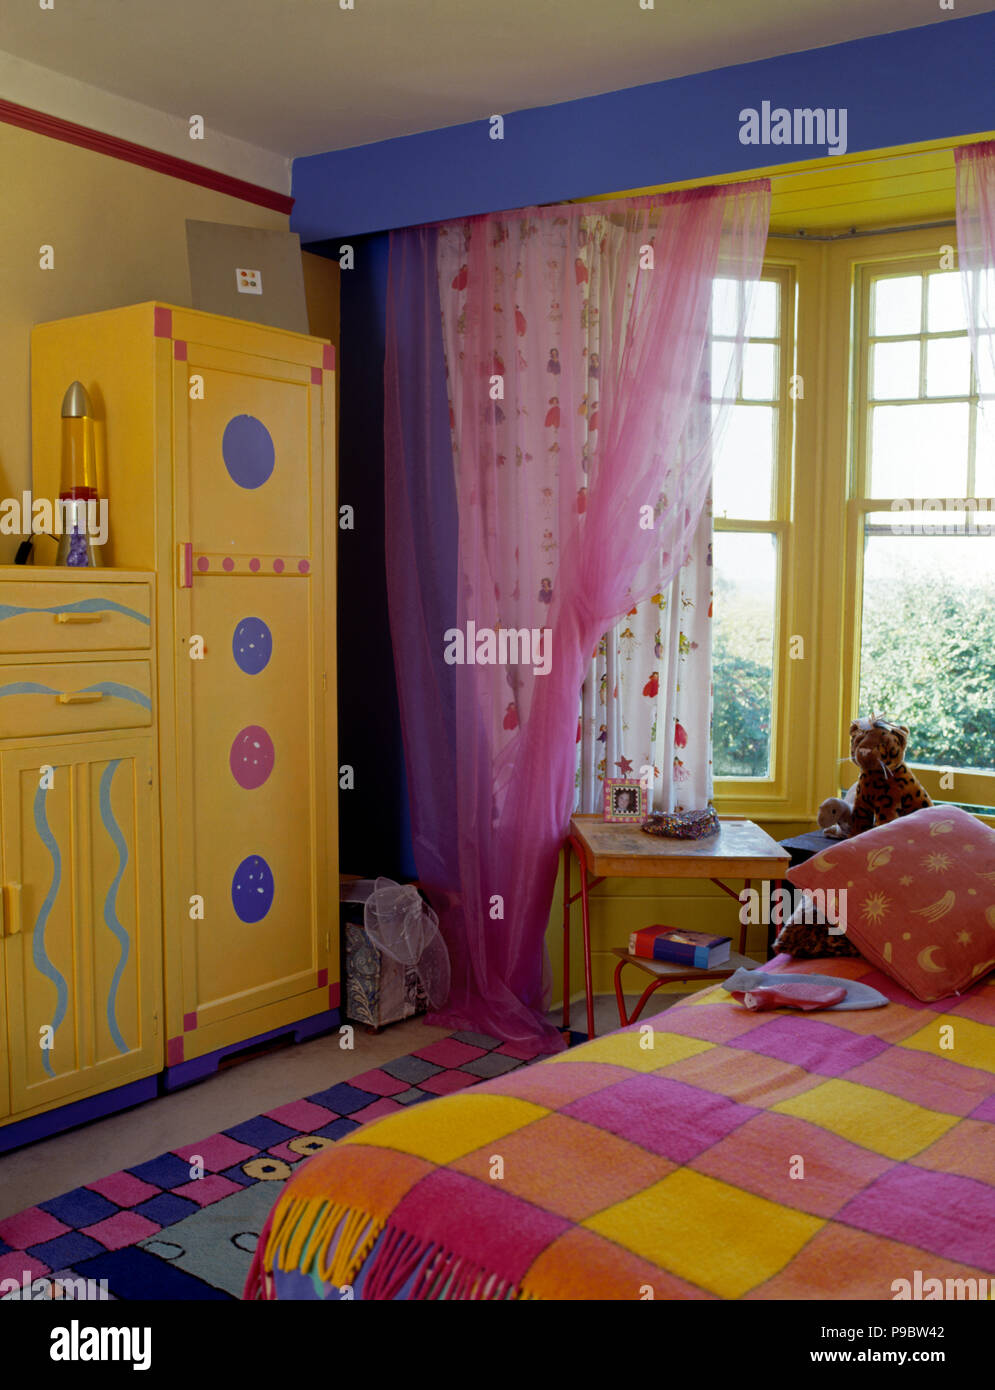 Pink net drapes on window in a nineties economy style children's bedroom with yellow painted cupboards Stock Photo